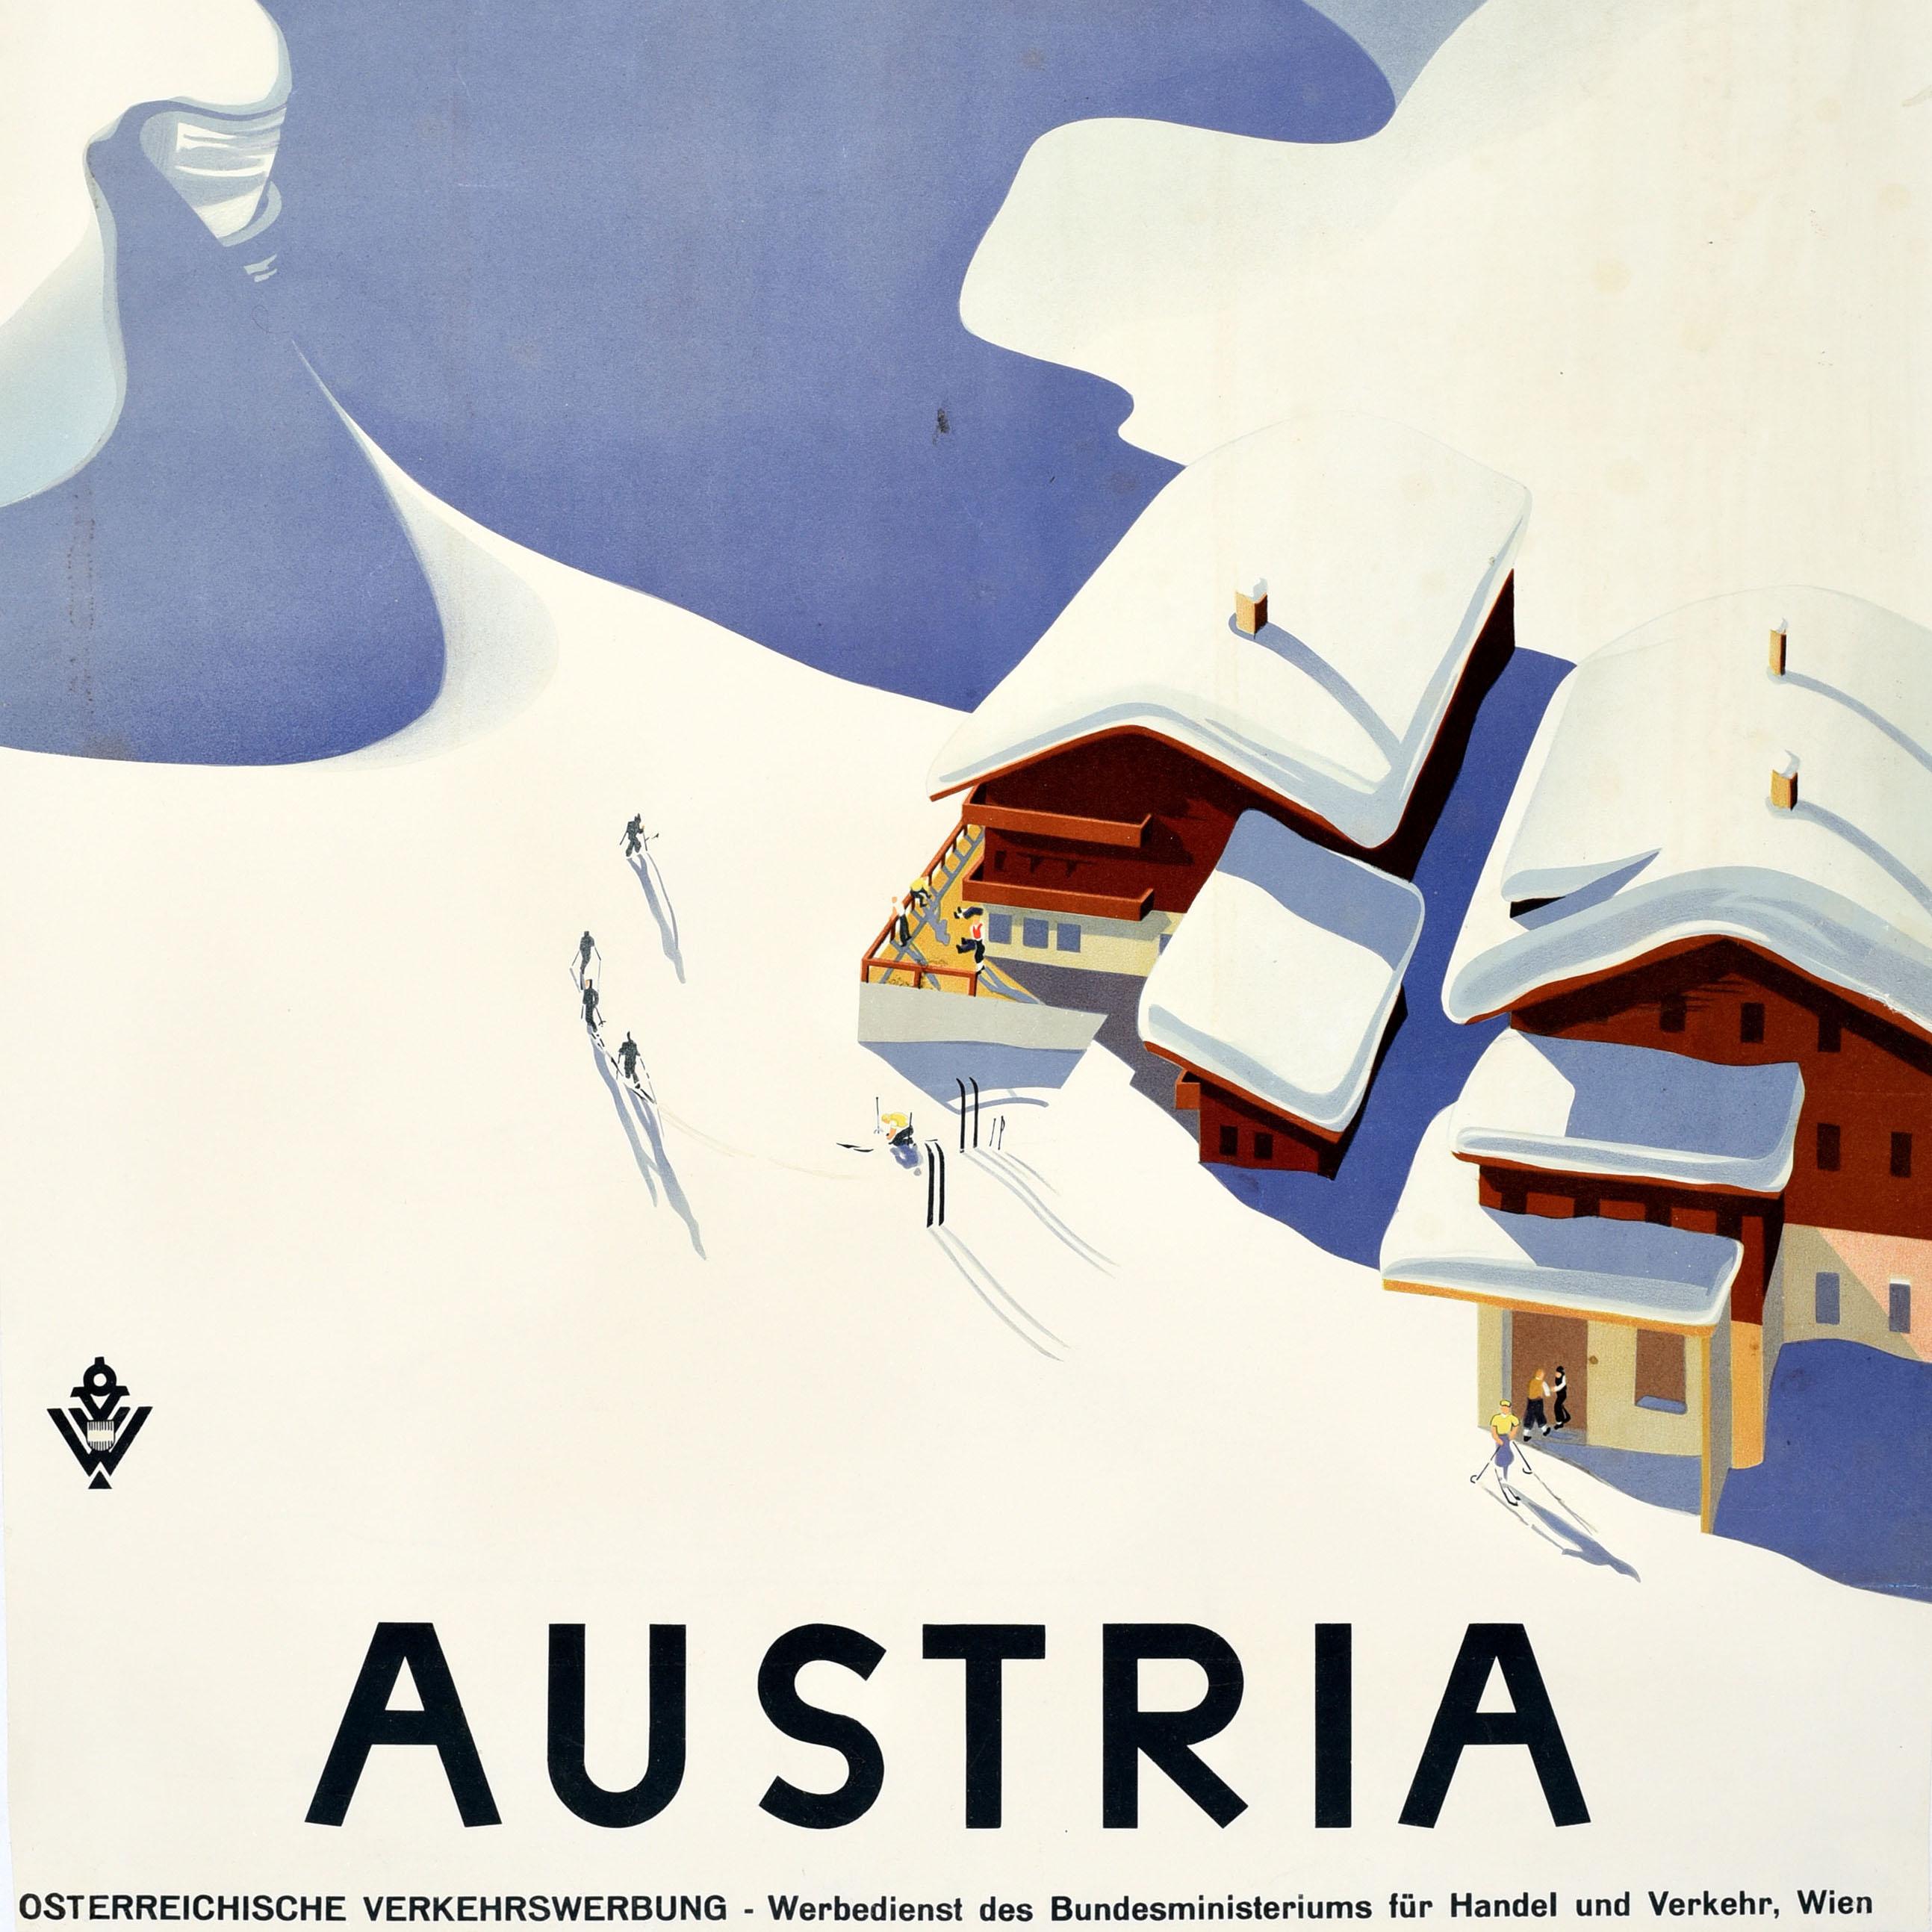 Original vintage winter sport and skiing travel poster for Austria featuring stunning artwork by Erich von Wunschheim depicting skiers on a snowy mountain next to snow topped chalets with people on the terrace and skis in the snow casting long